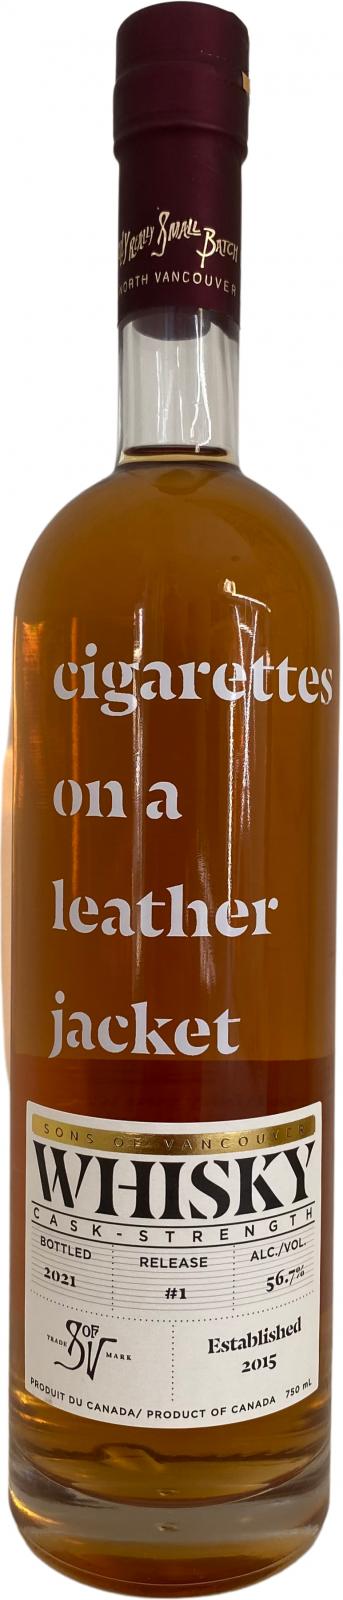 Sons of Vancouver Cigarettes on A leather jacket Release #1 Used Peated Malt Barrel 56.7% 750ml